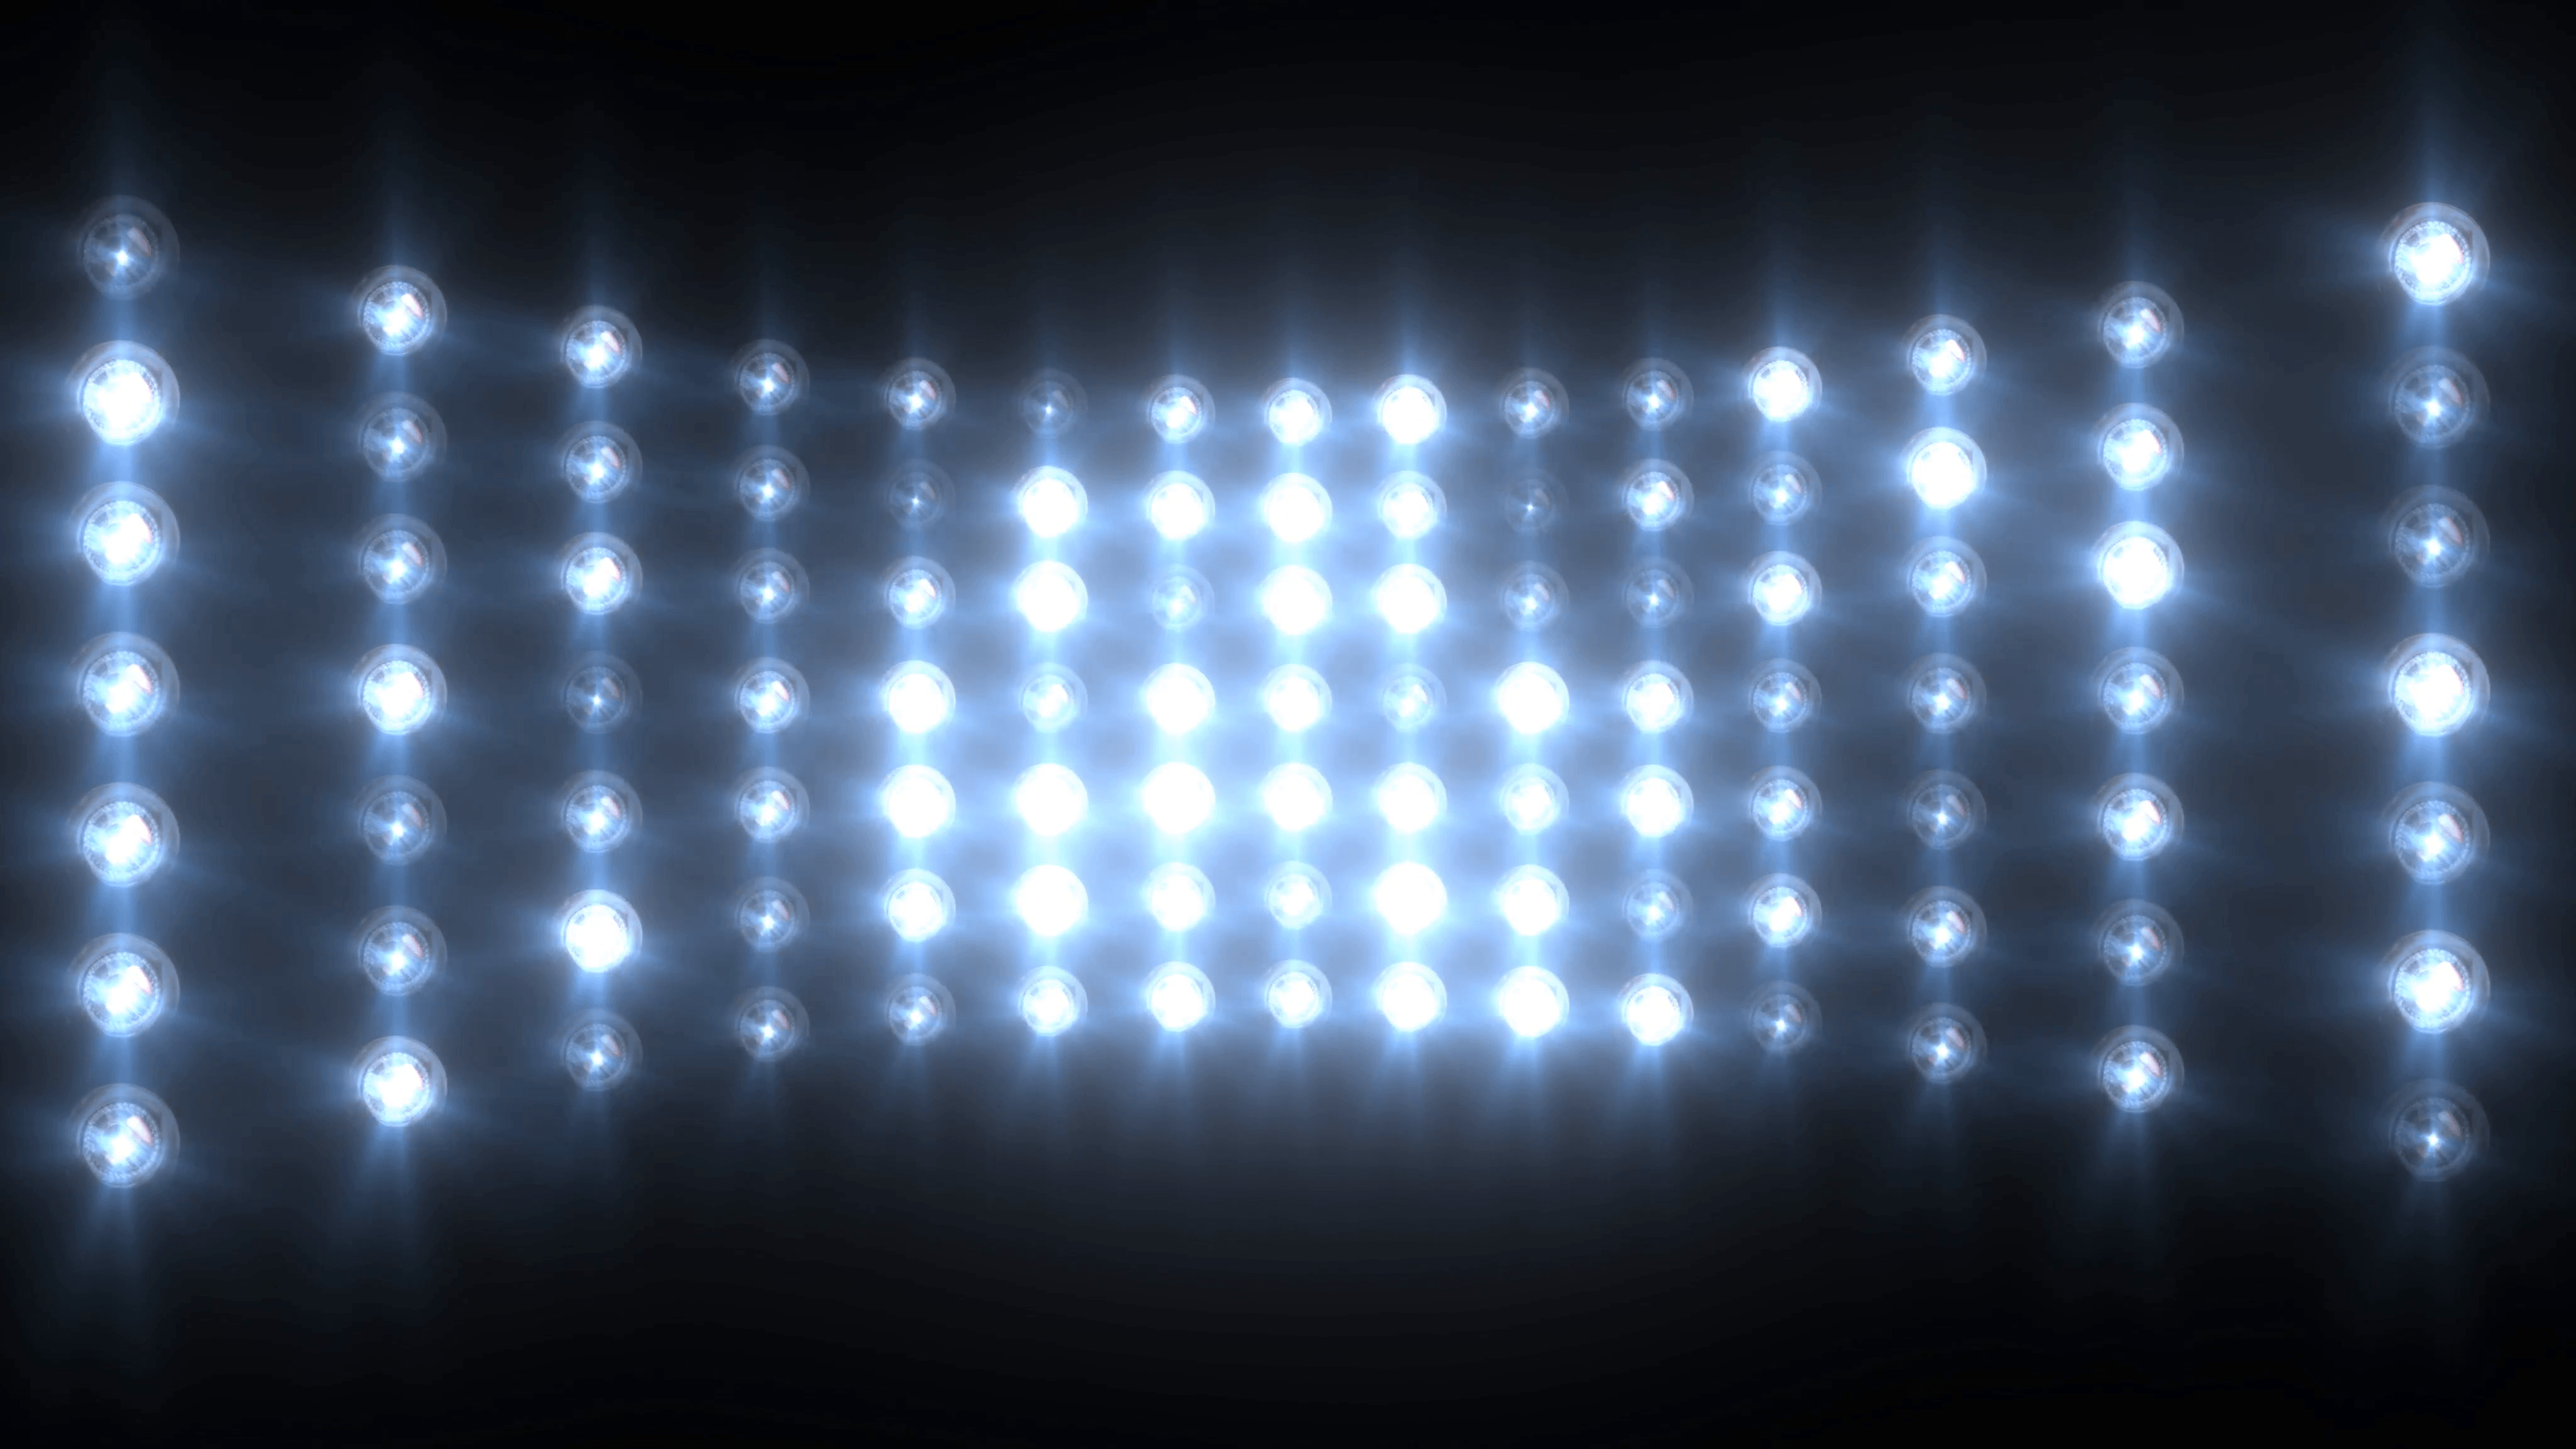 Flashing Blue Wall of Lights Concert Stage Sports Stadium Background